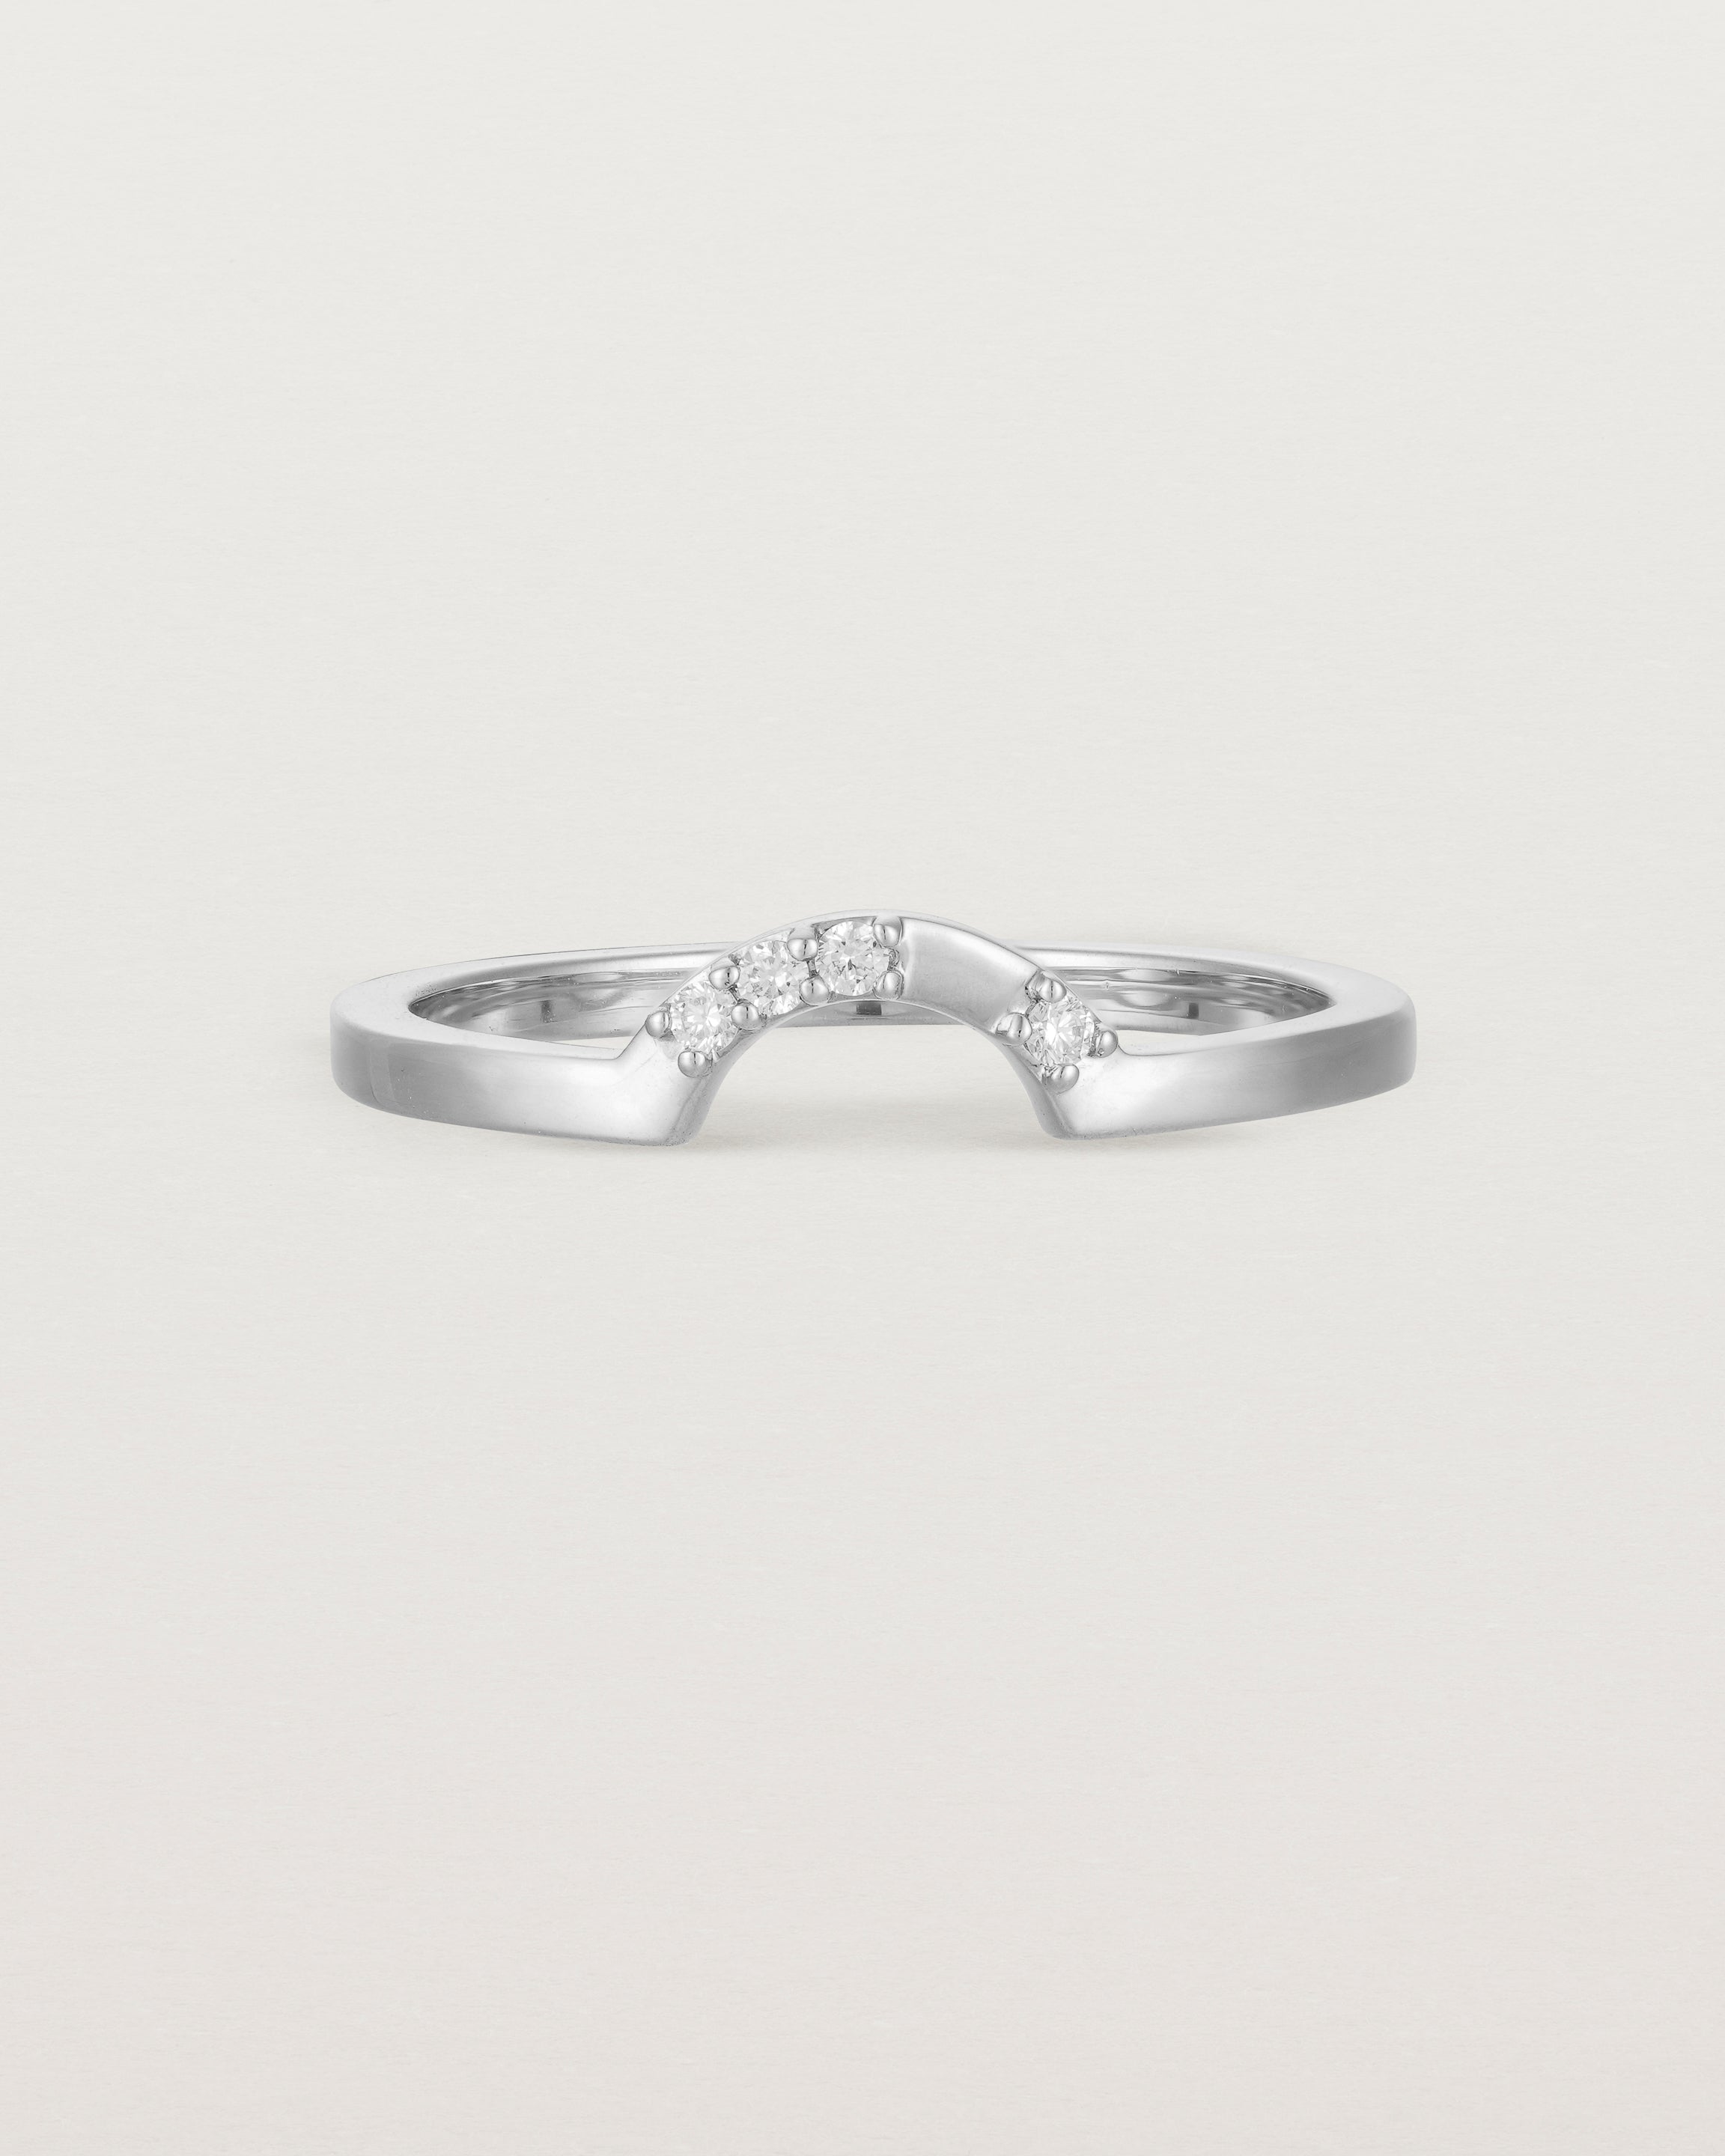 A classic small arc crown ring featuring scattered white diamonds, crafted in white gold